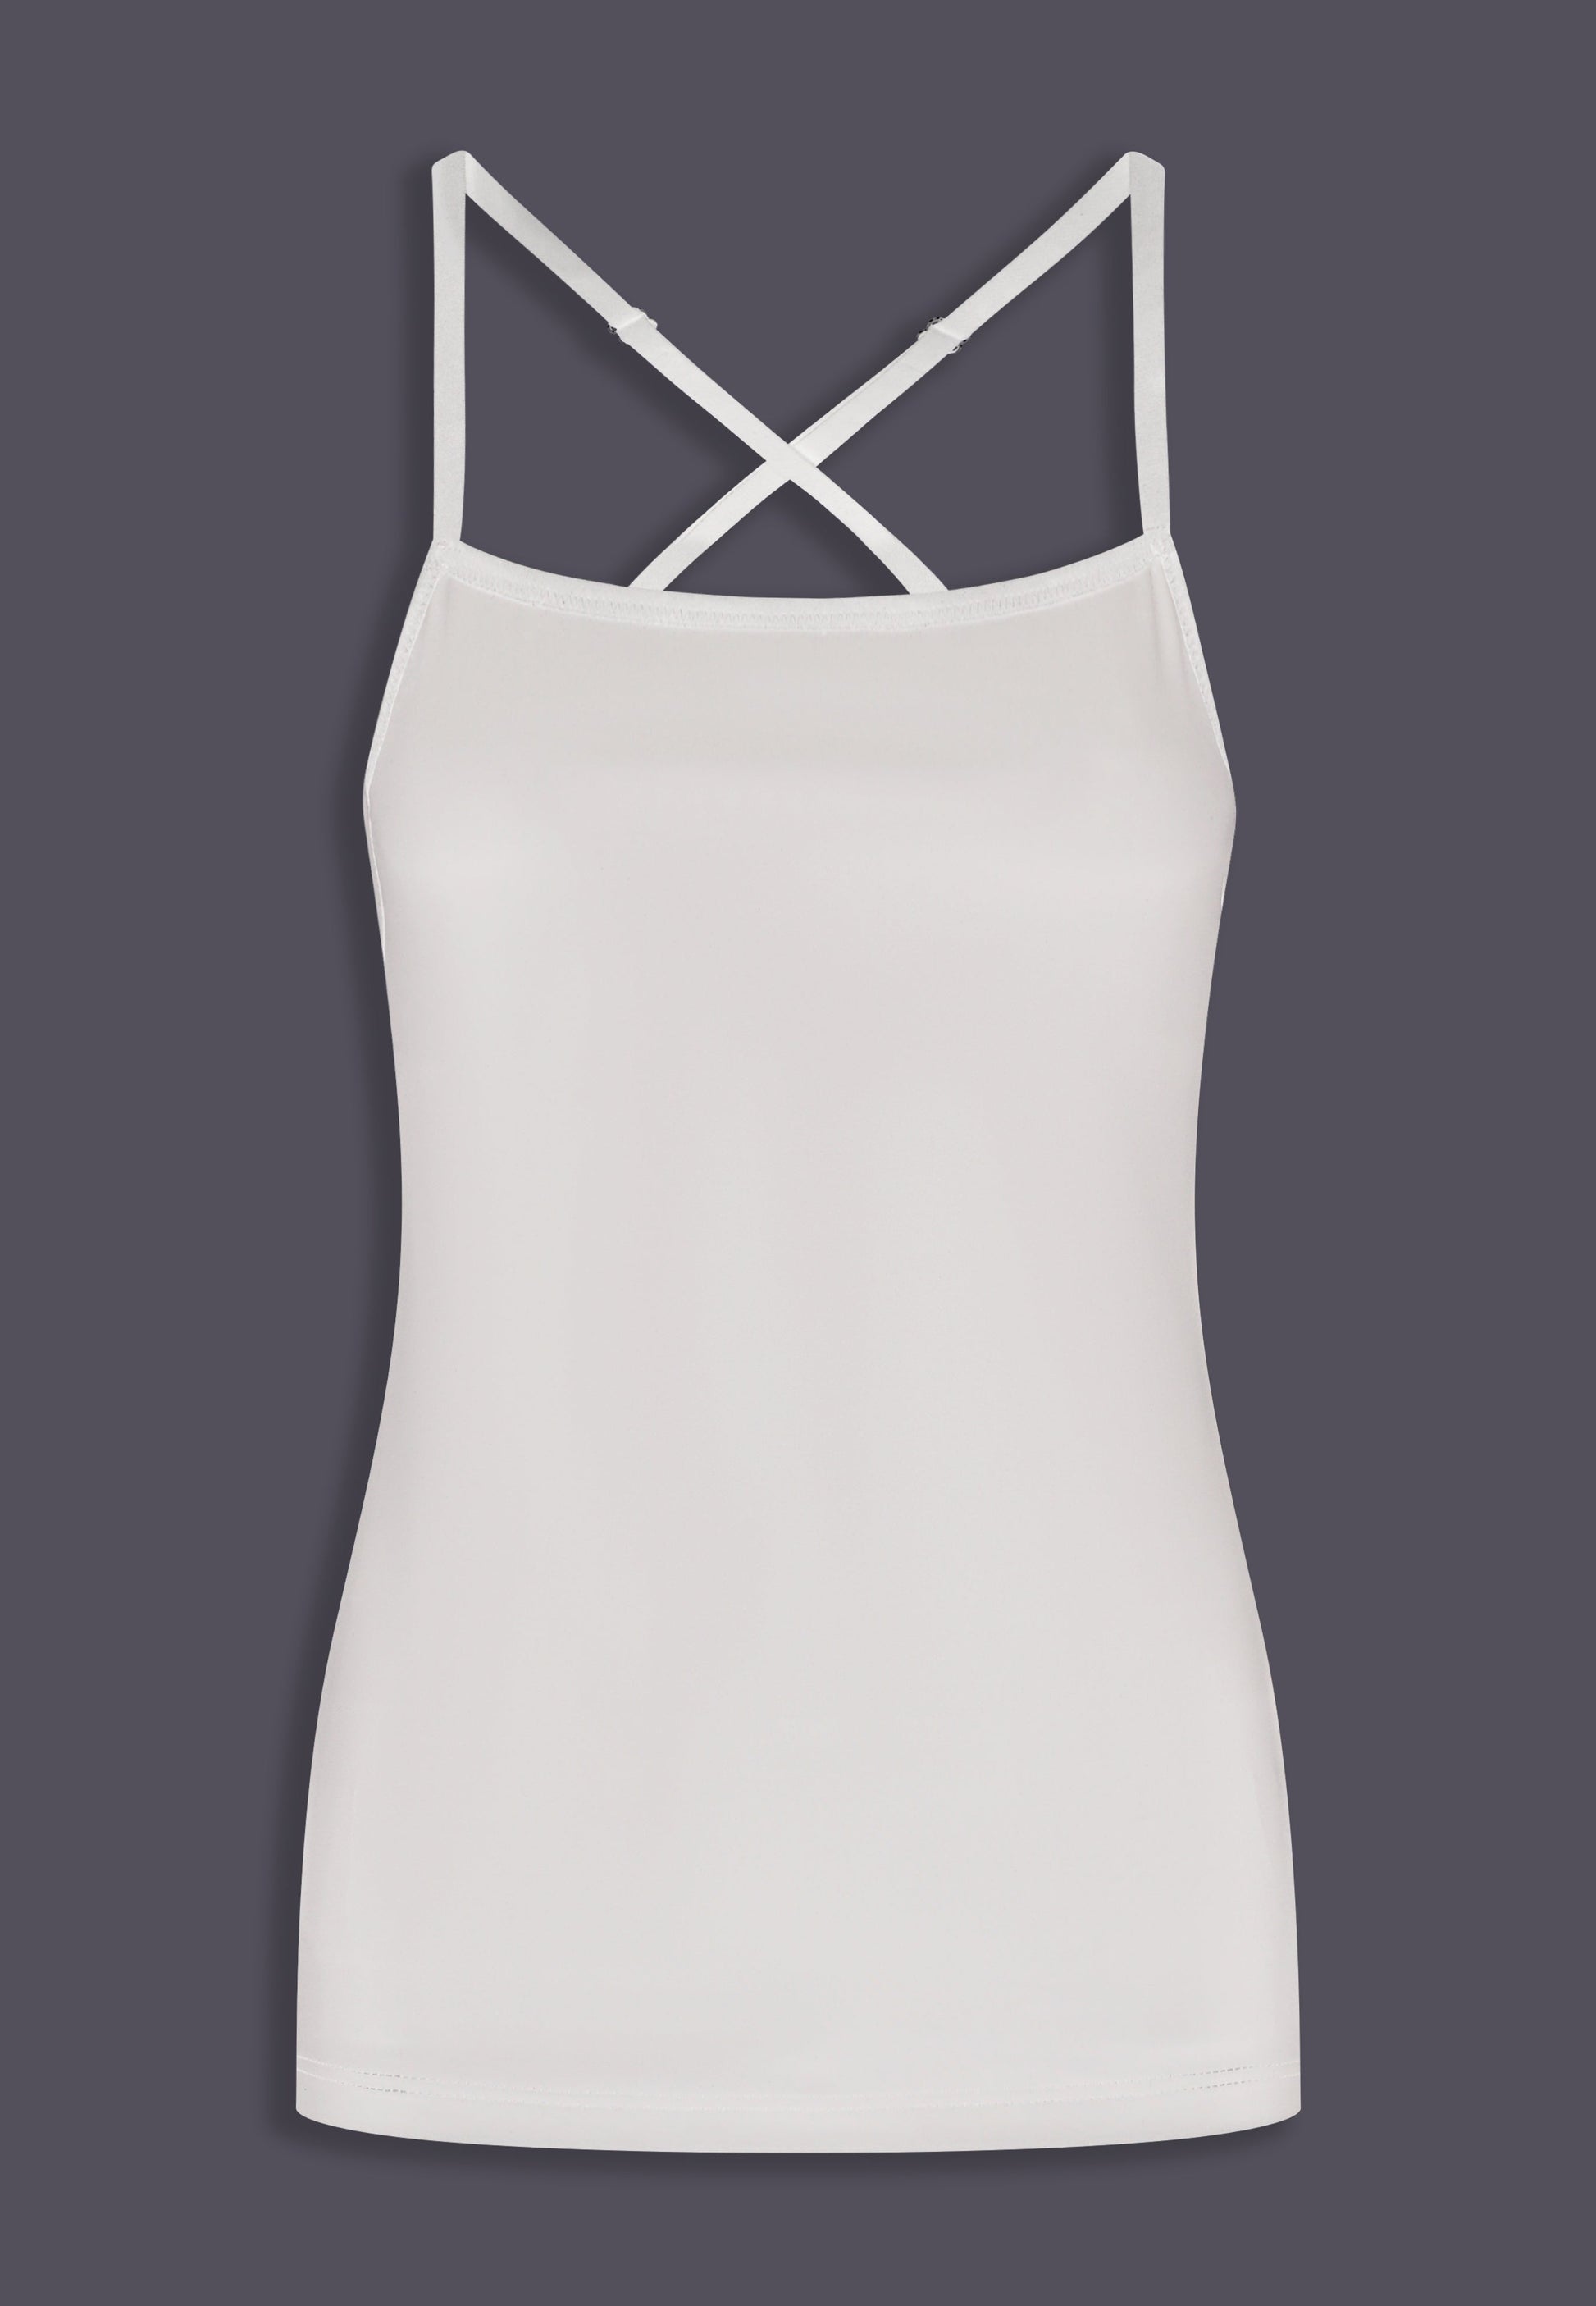 Singlet Advanced white, front view